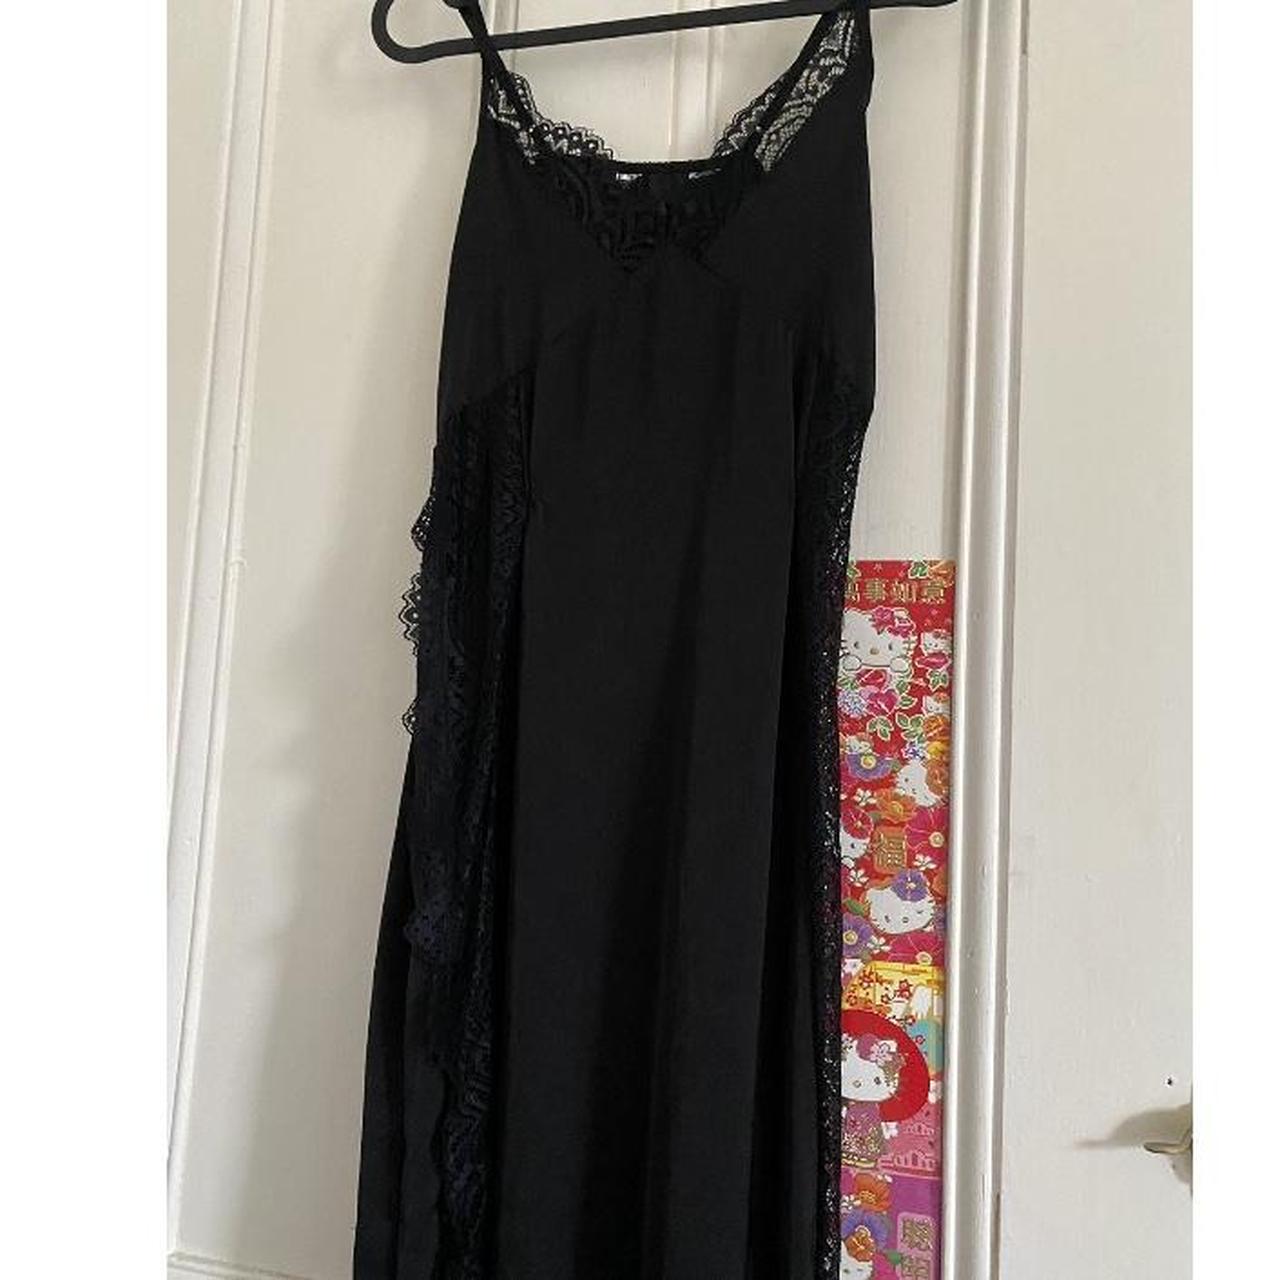 Fitted black lingerie dress Would fit a 4-6 - Depop